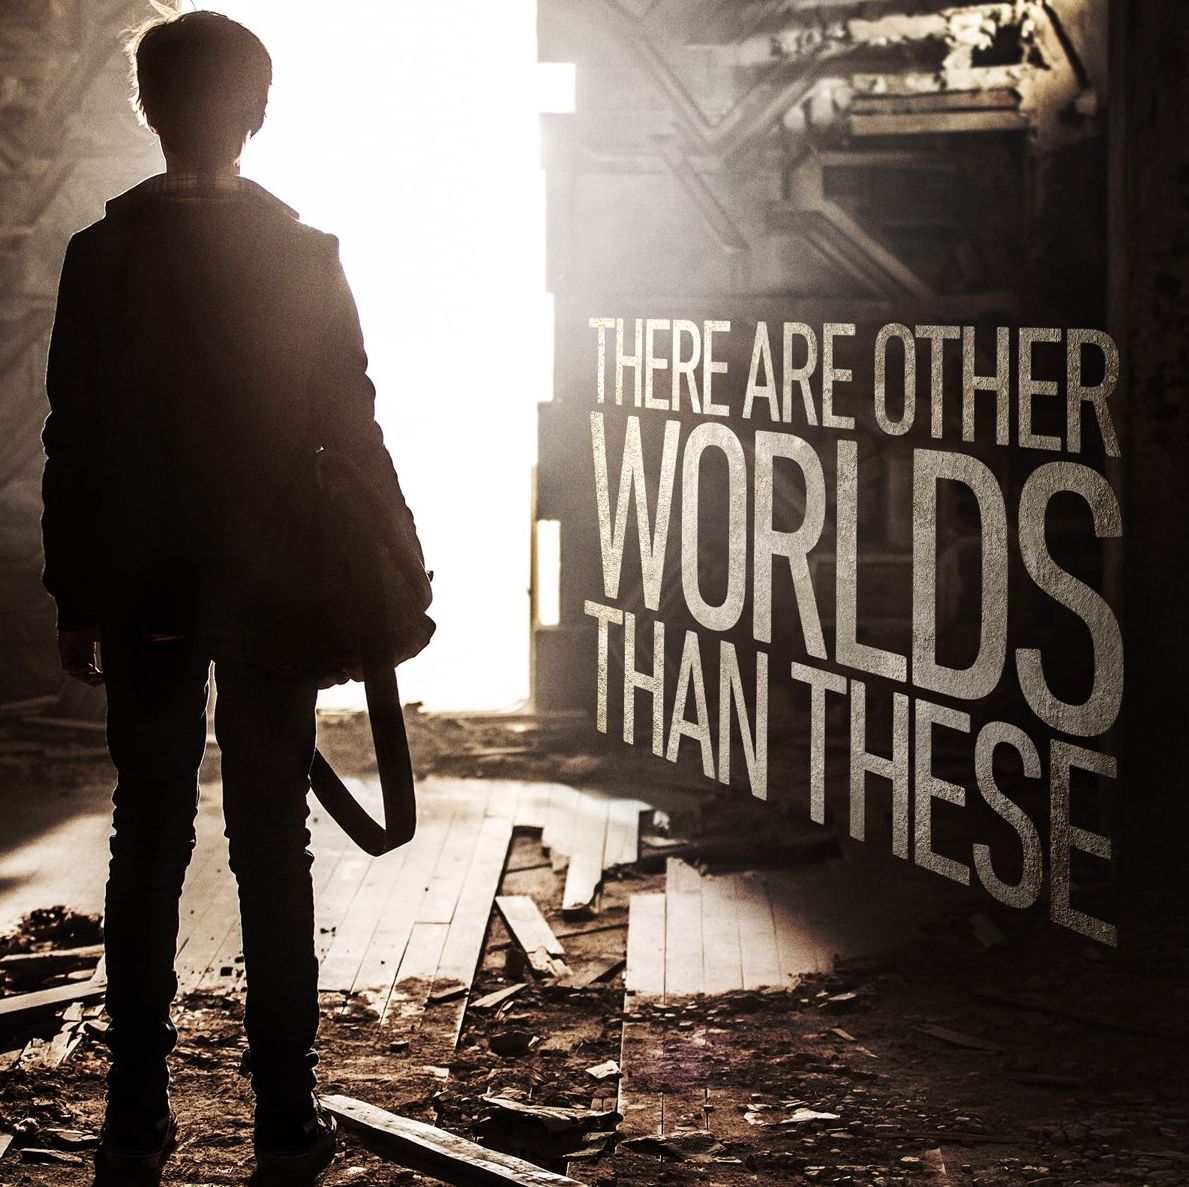 New image for 'The Dark Tower' Teases More Worlds than One